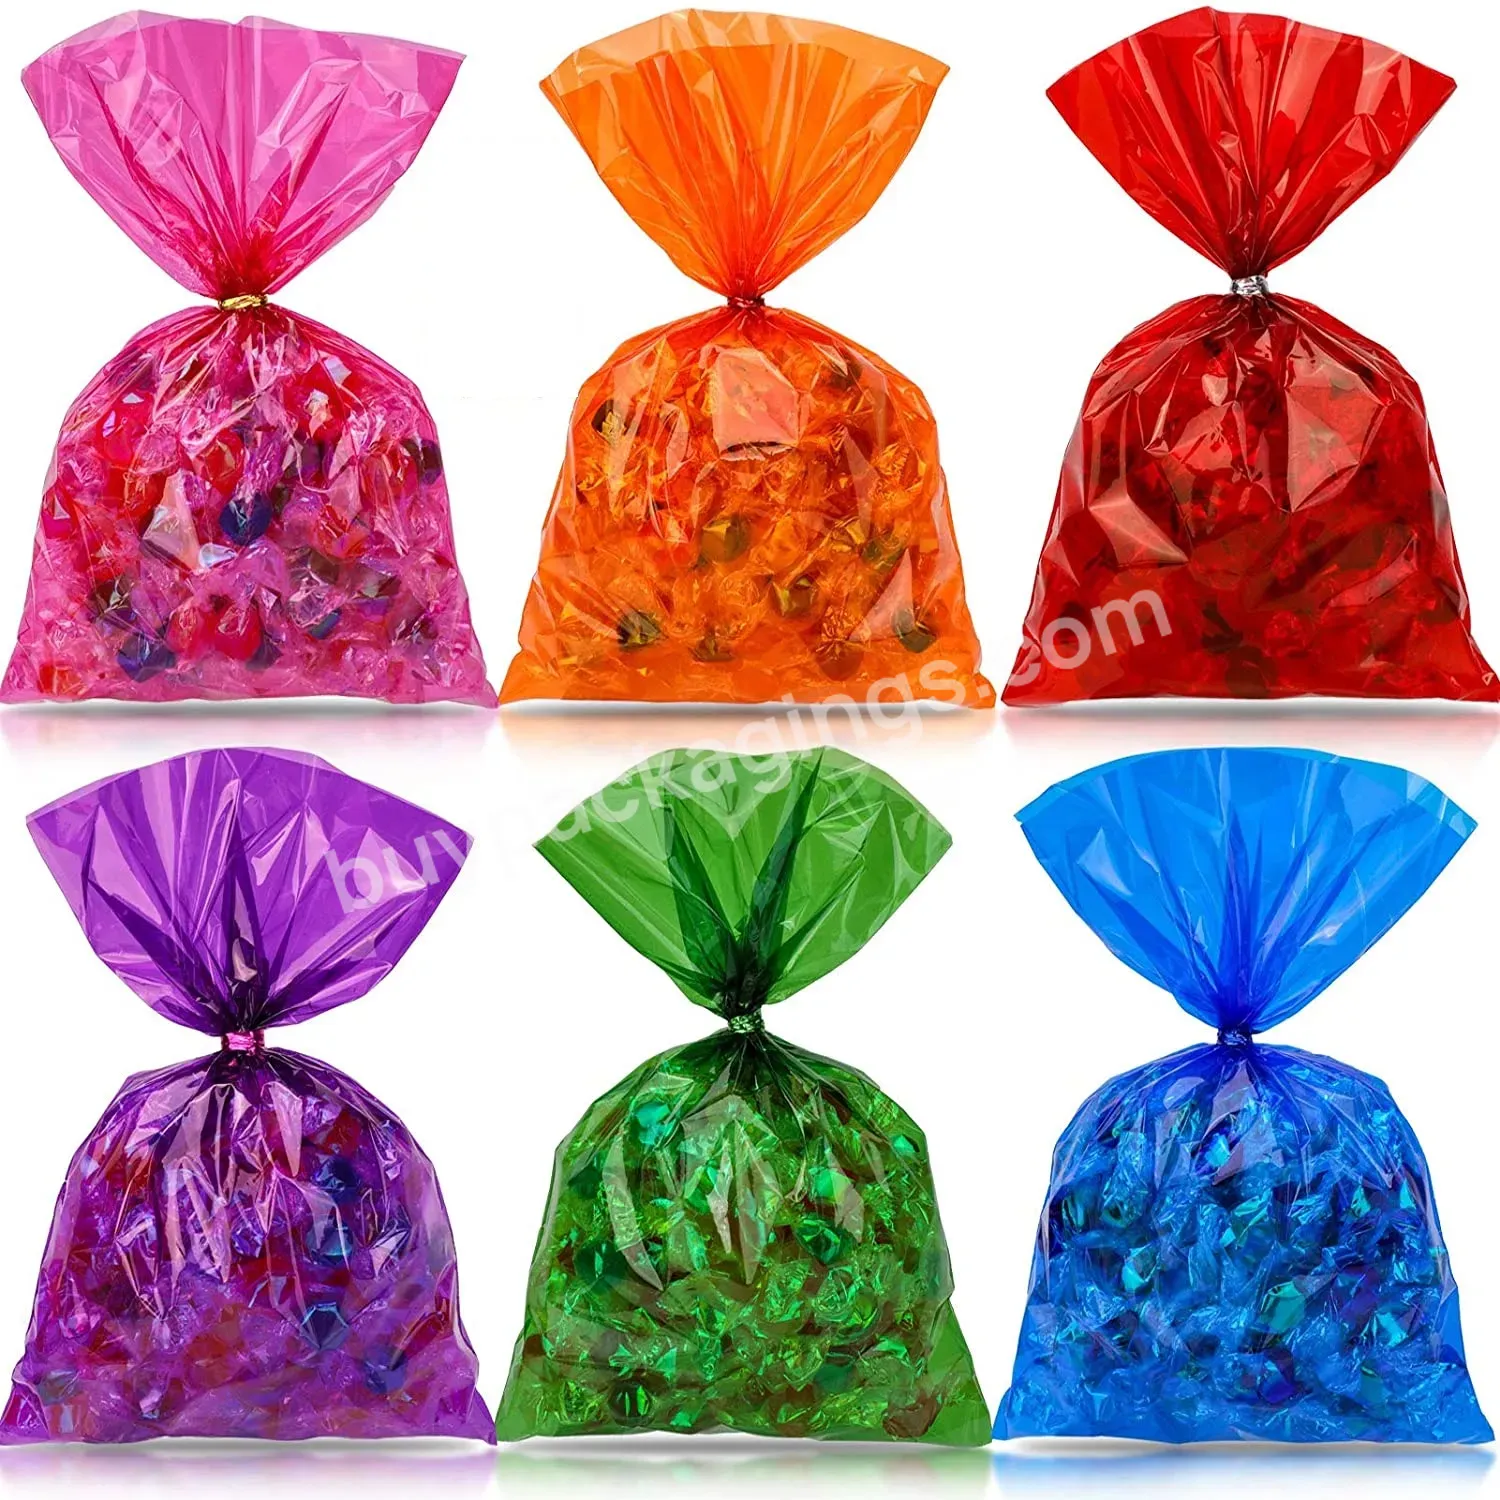 Christmas Cellophane Bags Christmas Treat Bags Candy Gift Bags With Twist Ties For Christmas Theme Party Supplies - Buy Christmas Cellophane Bags,Christmas Treat Bags,Candy Gift Bags With Twist Ties.